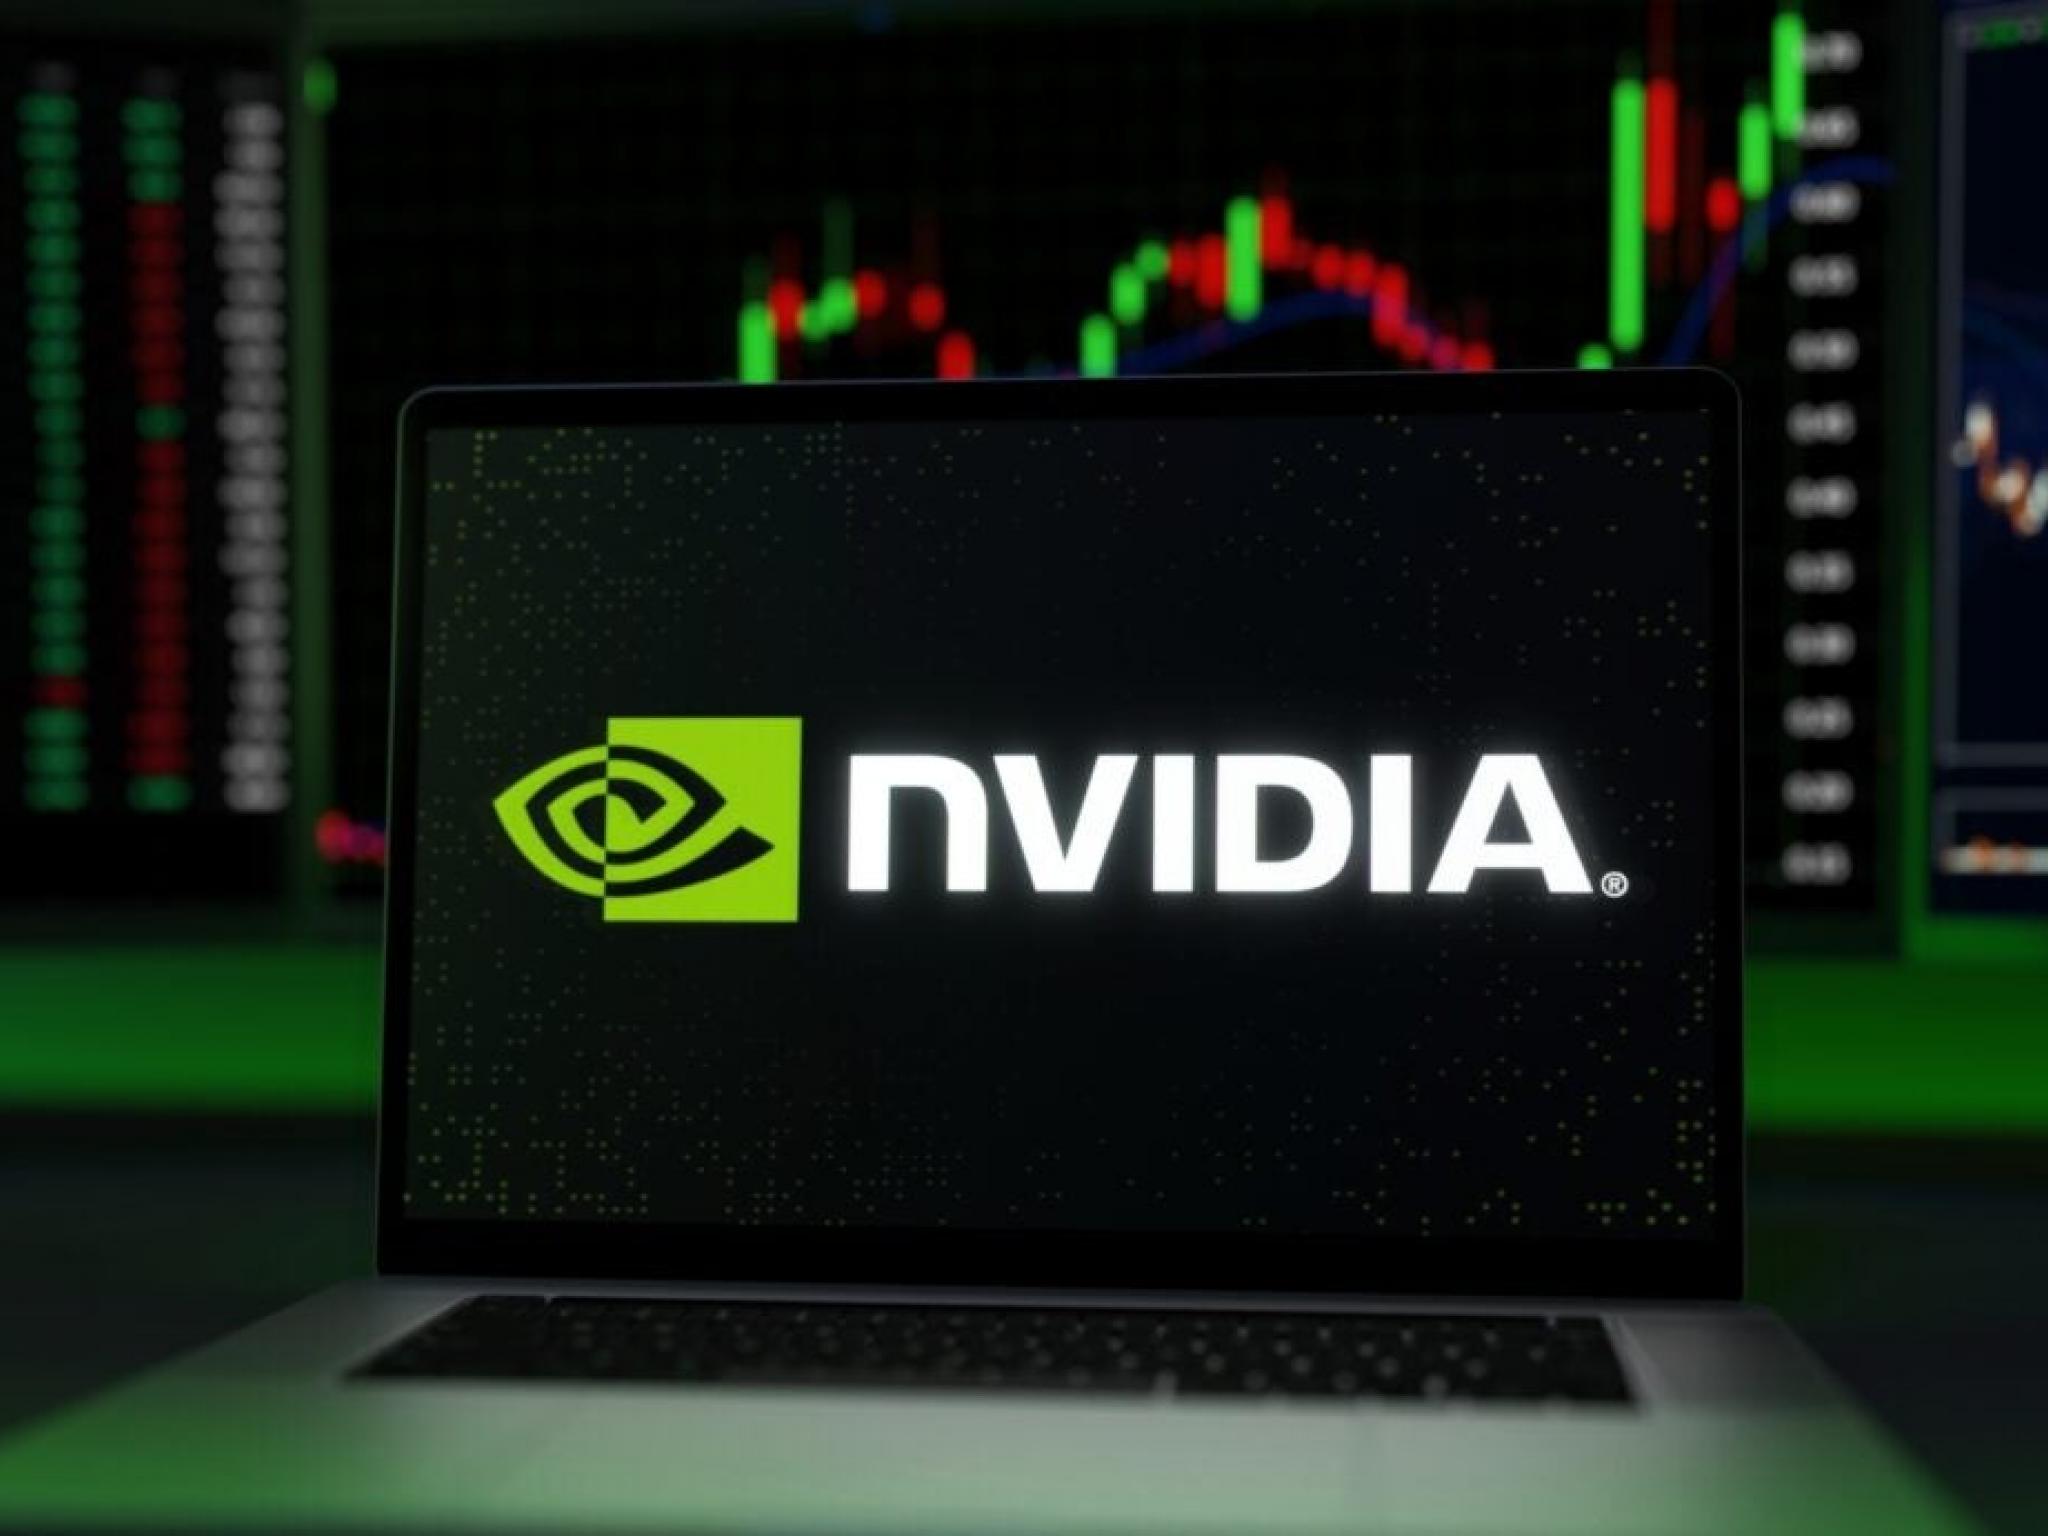  this-analyst-with-85-accuracy-rate-sees-around-8-upside-in-nvidia---here-are-5-stock-picks-for-last-week-from-wall-streets-most-accurate-analysts 